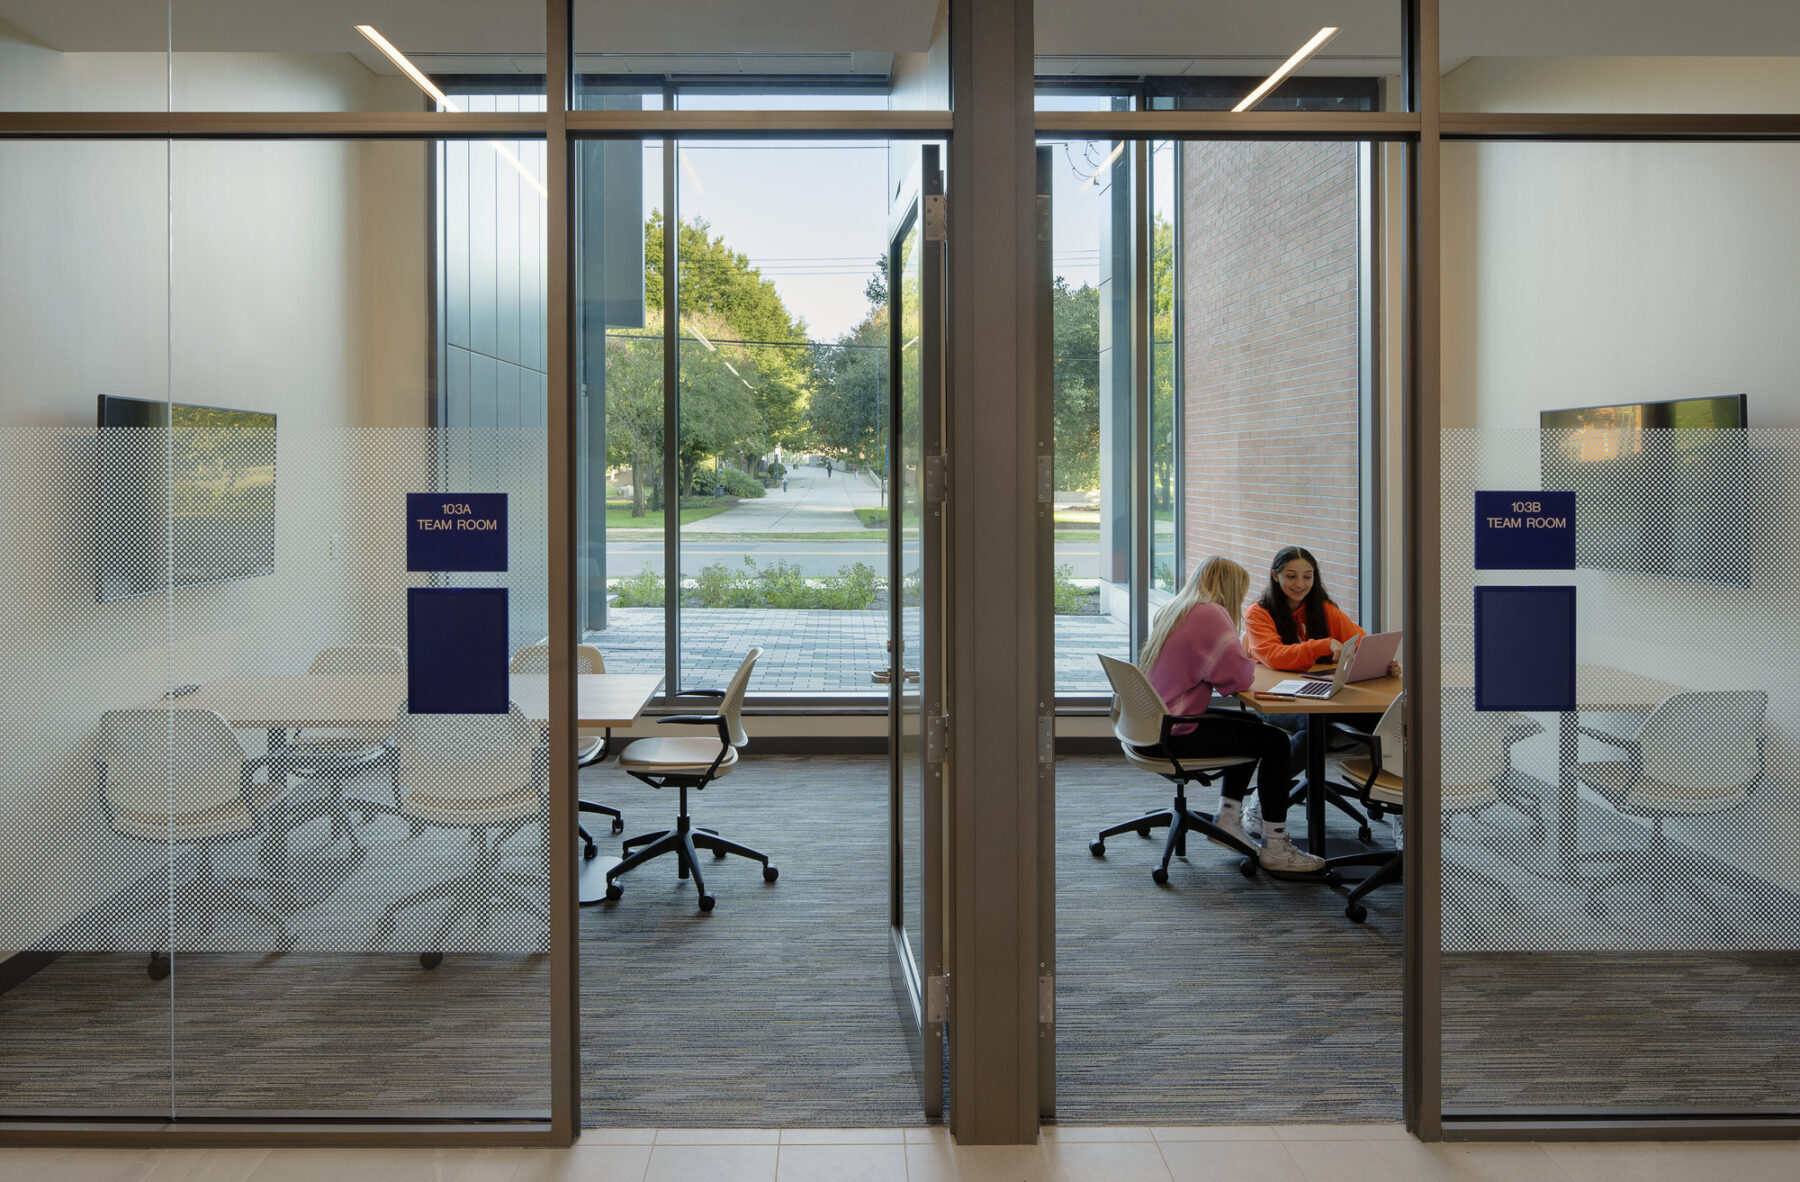 Photo with view into ground floor study rooms with full height windows viewing the pedestrian walkway through campus on the exterior